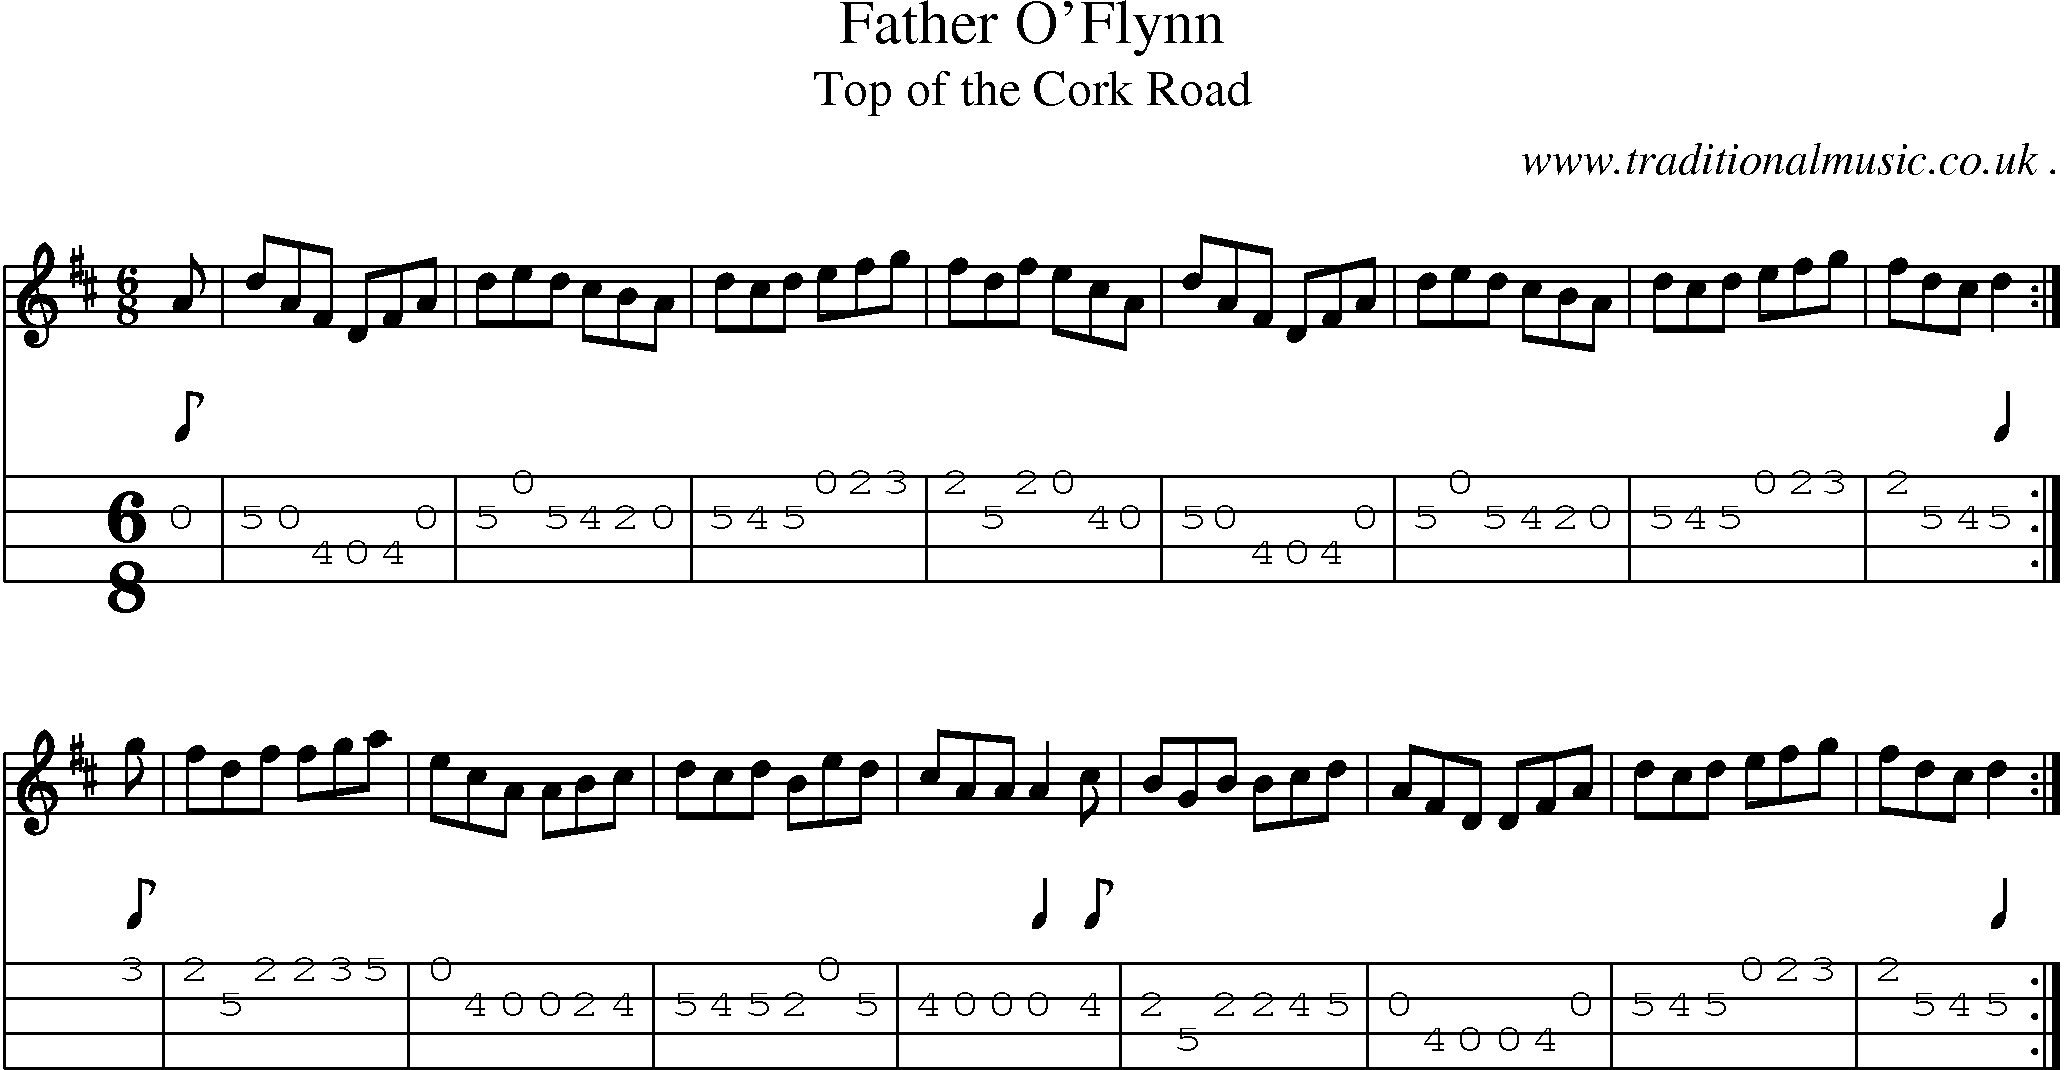 Sheet-Music and Mandolin Tabs for Father Oflynn